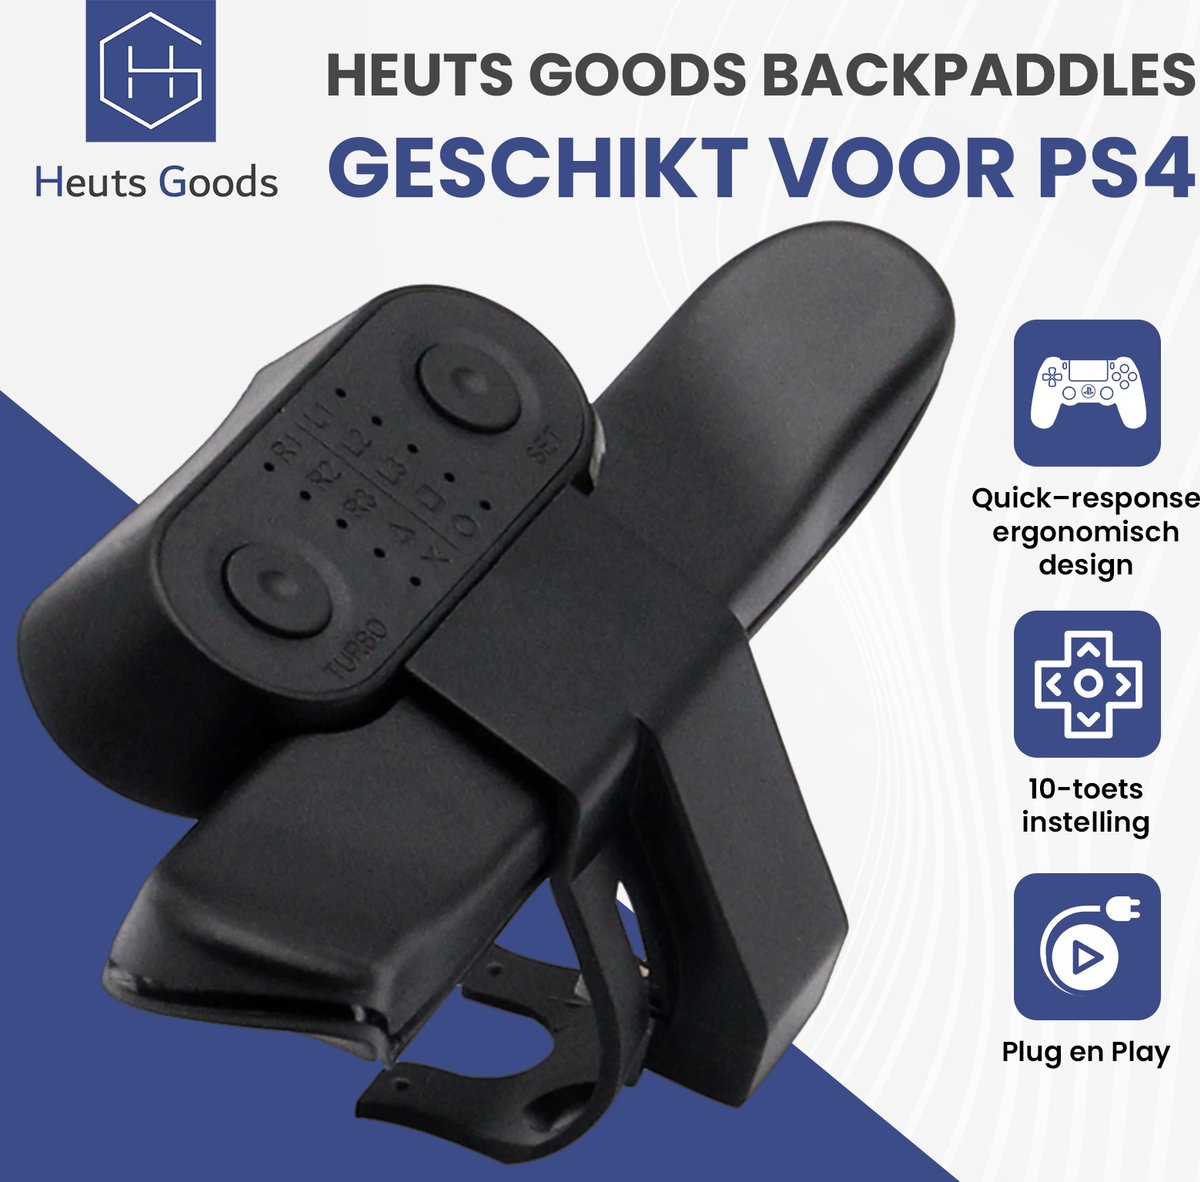 Heuts Goods - LUXE Backpaddles voor PS4 - Back Button Attachment voor PS4 - GAME Accessoires - Game controller accessoire - Controller paddles - Controller Shifter Paddles